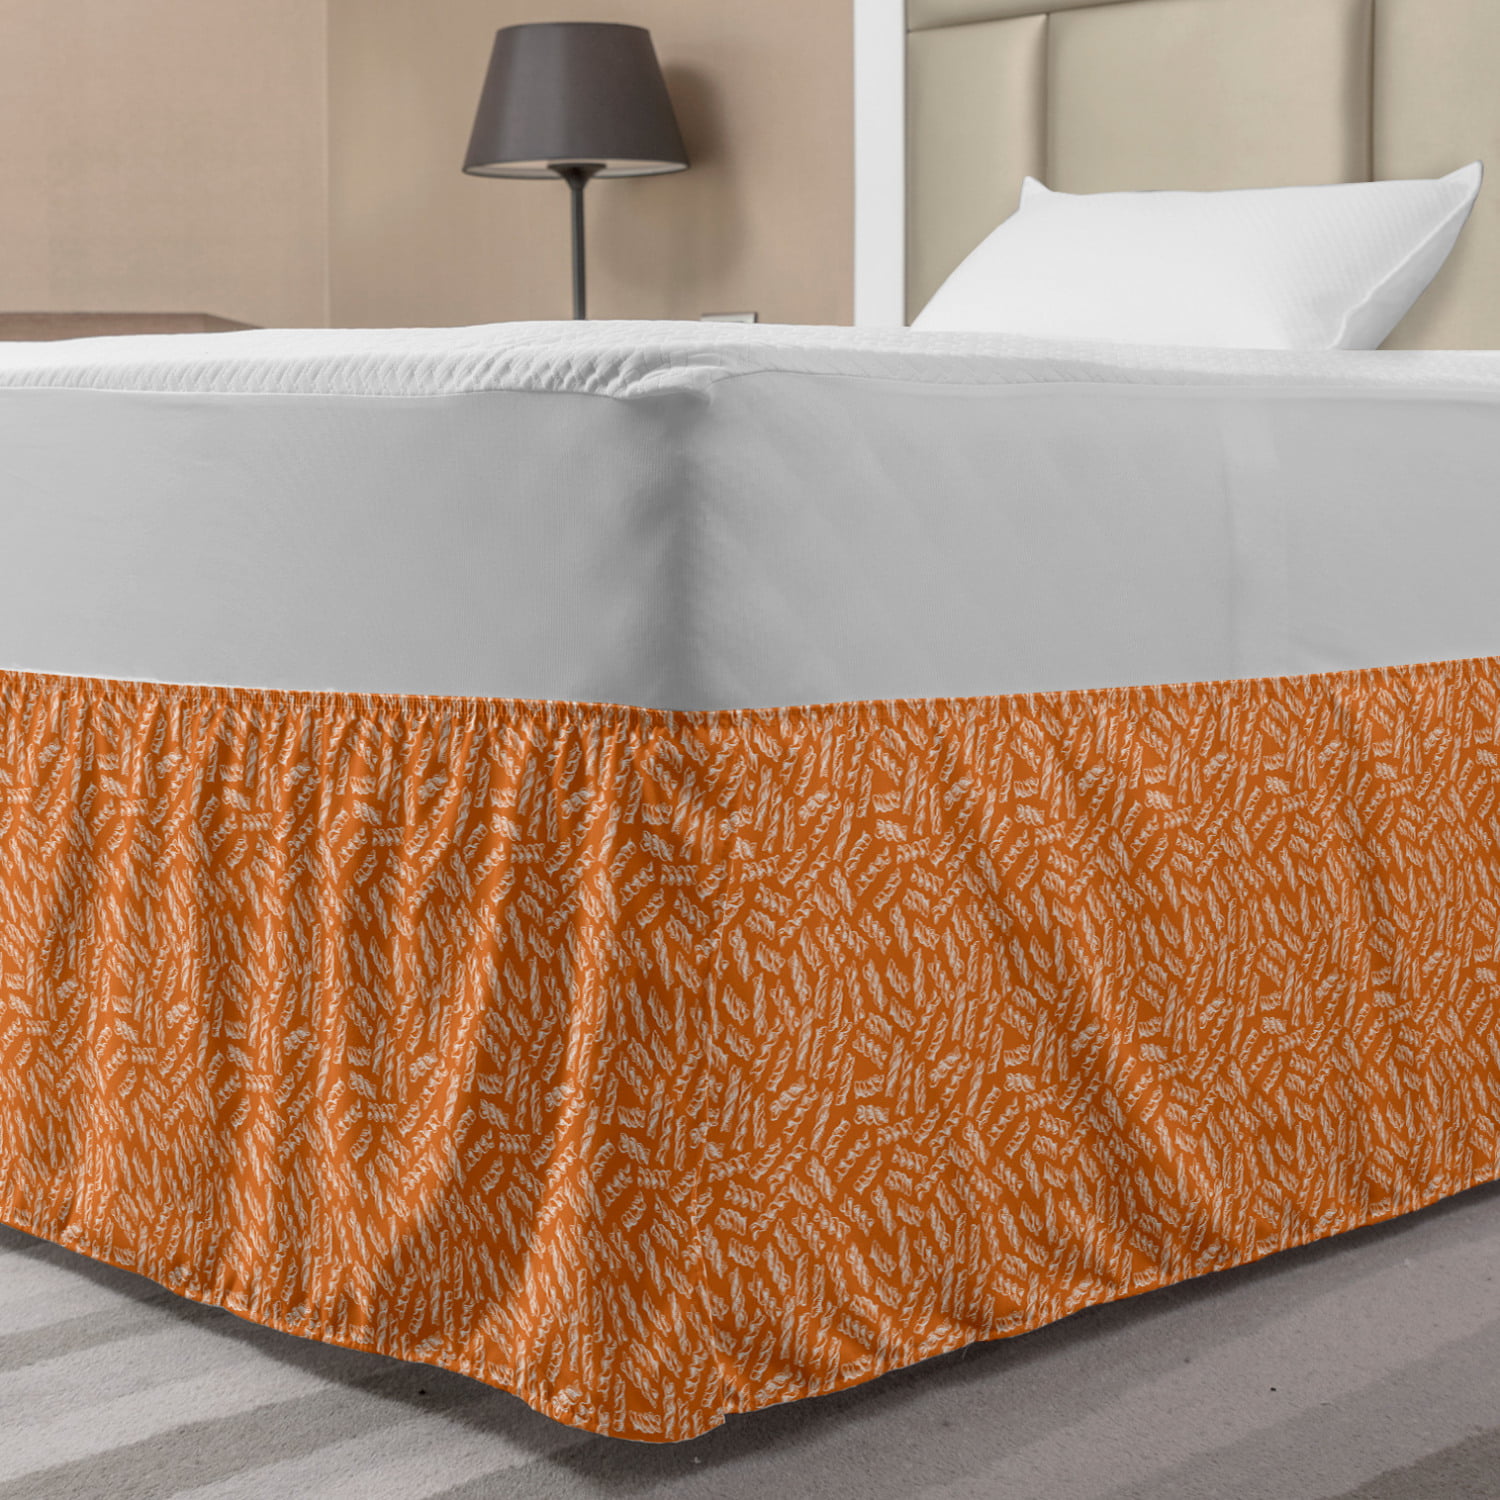 Wrap Around Elastic Sleek Alternative for Bed Skirts N&Y HOME Box Spring Cover 